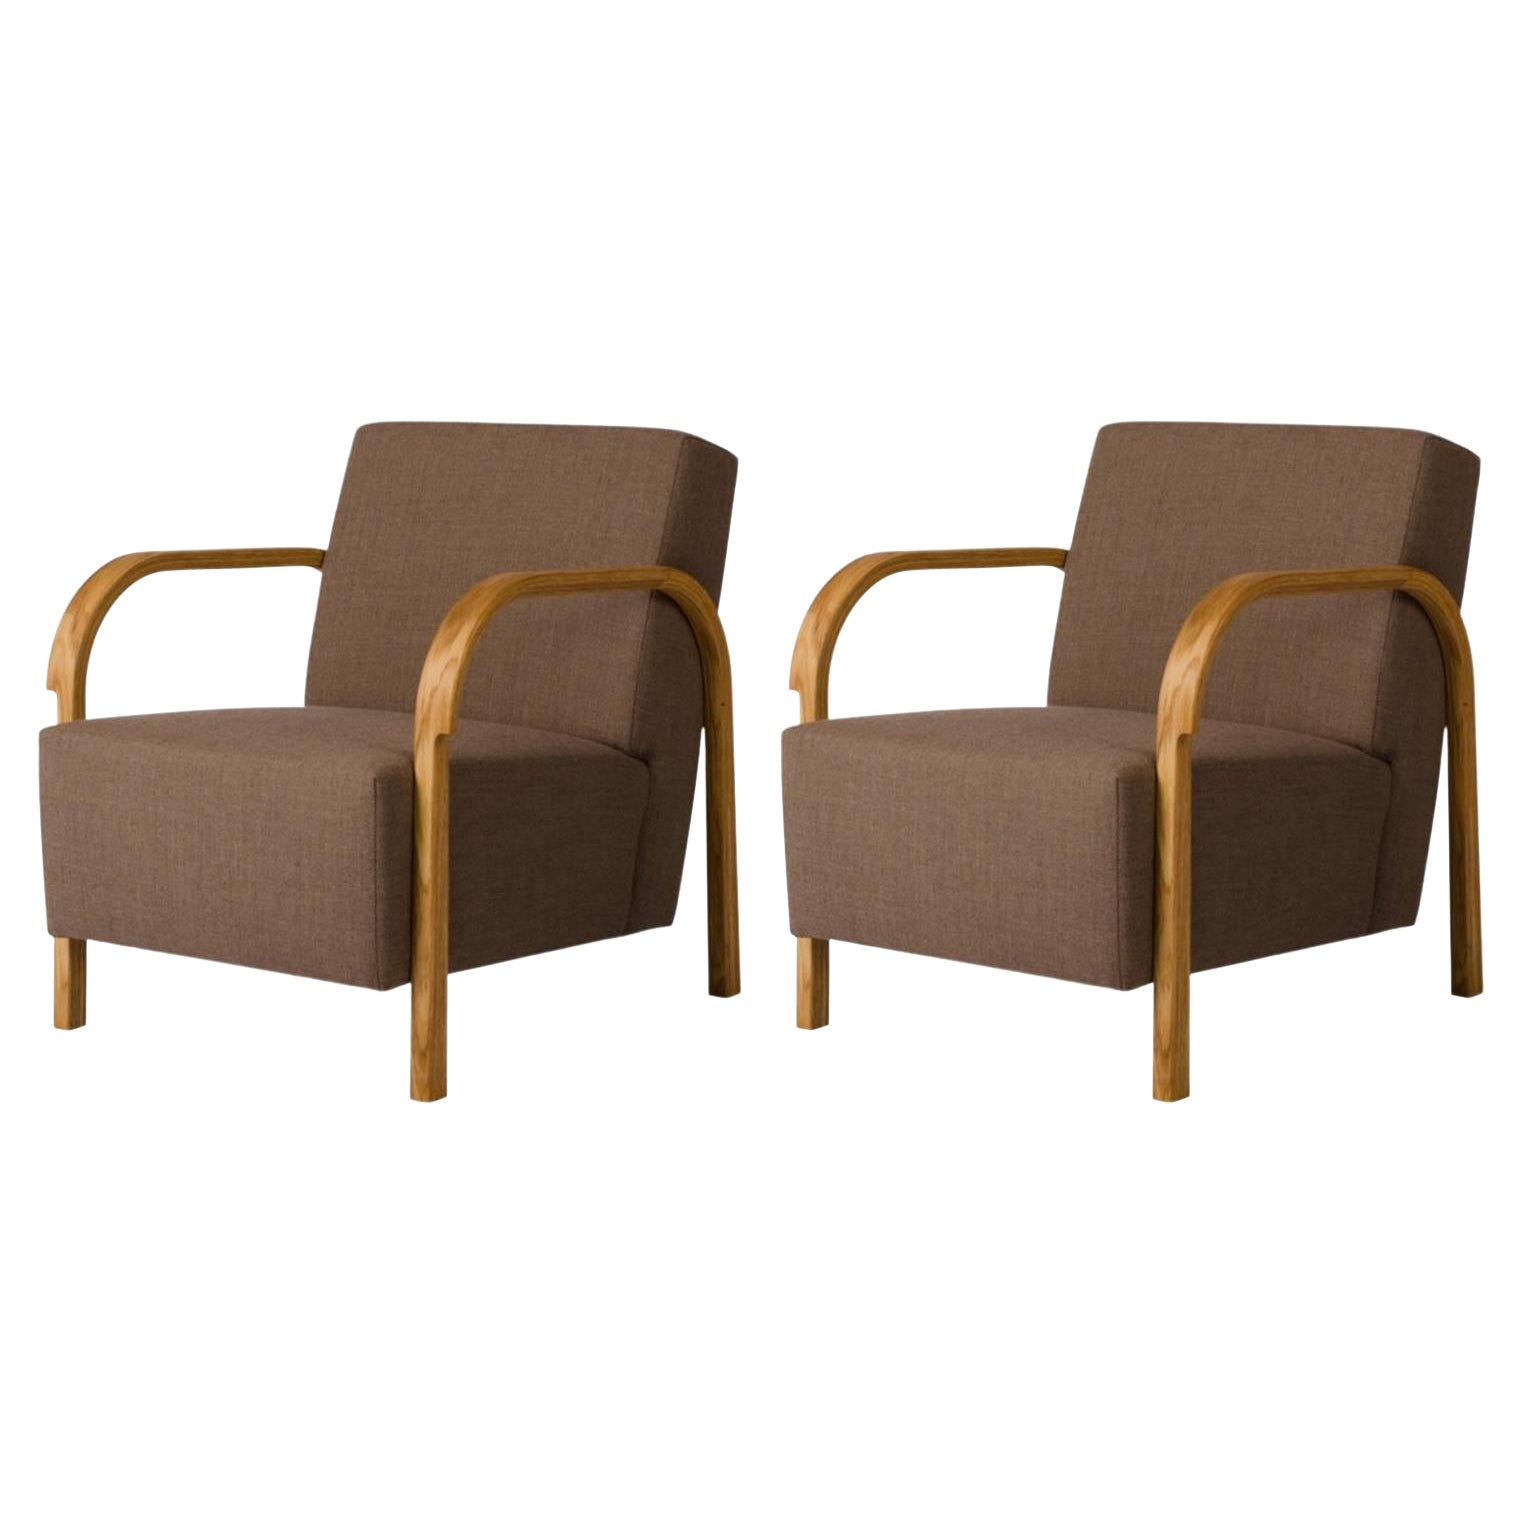 Set of 2 Kvadrat / Hallingdal & Fiord Arch Lounge Chairs by Mazo Design